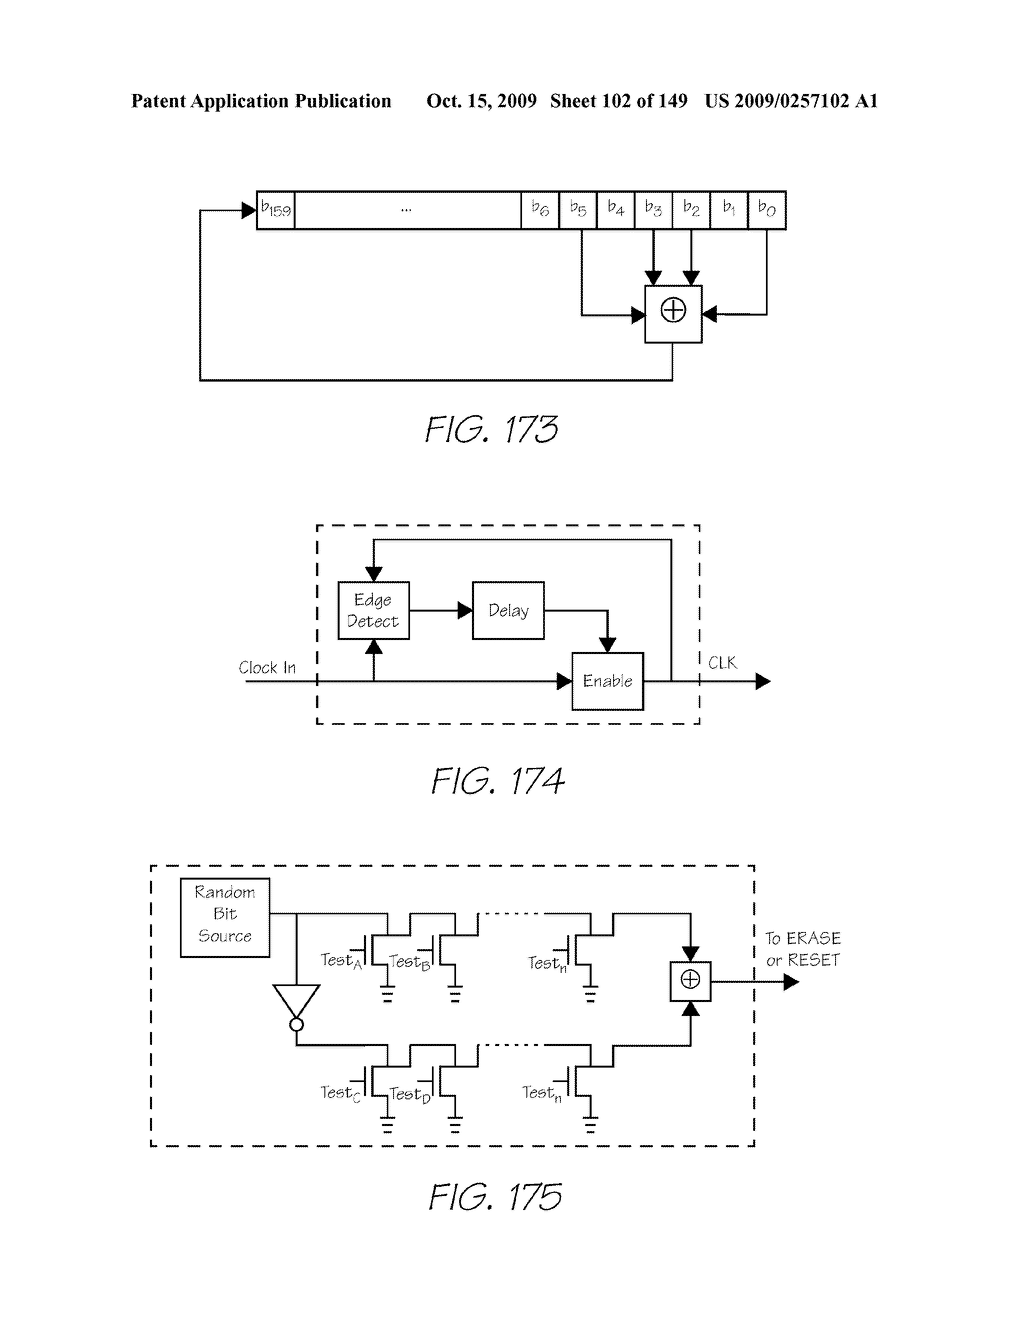 IMAGE PROCESSING APPARATUS HAVING CARD READER FOR APPLYING EFFECTS STORED ON A CARD TO A STORED IMAGE - diagram, schematic, and image 103